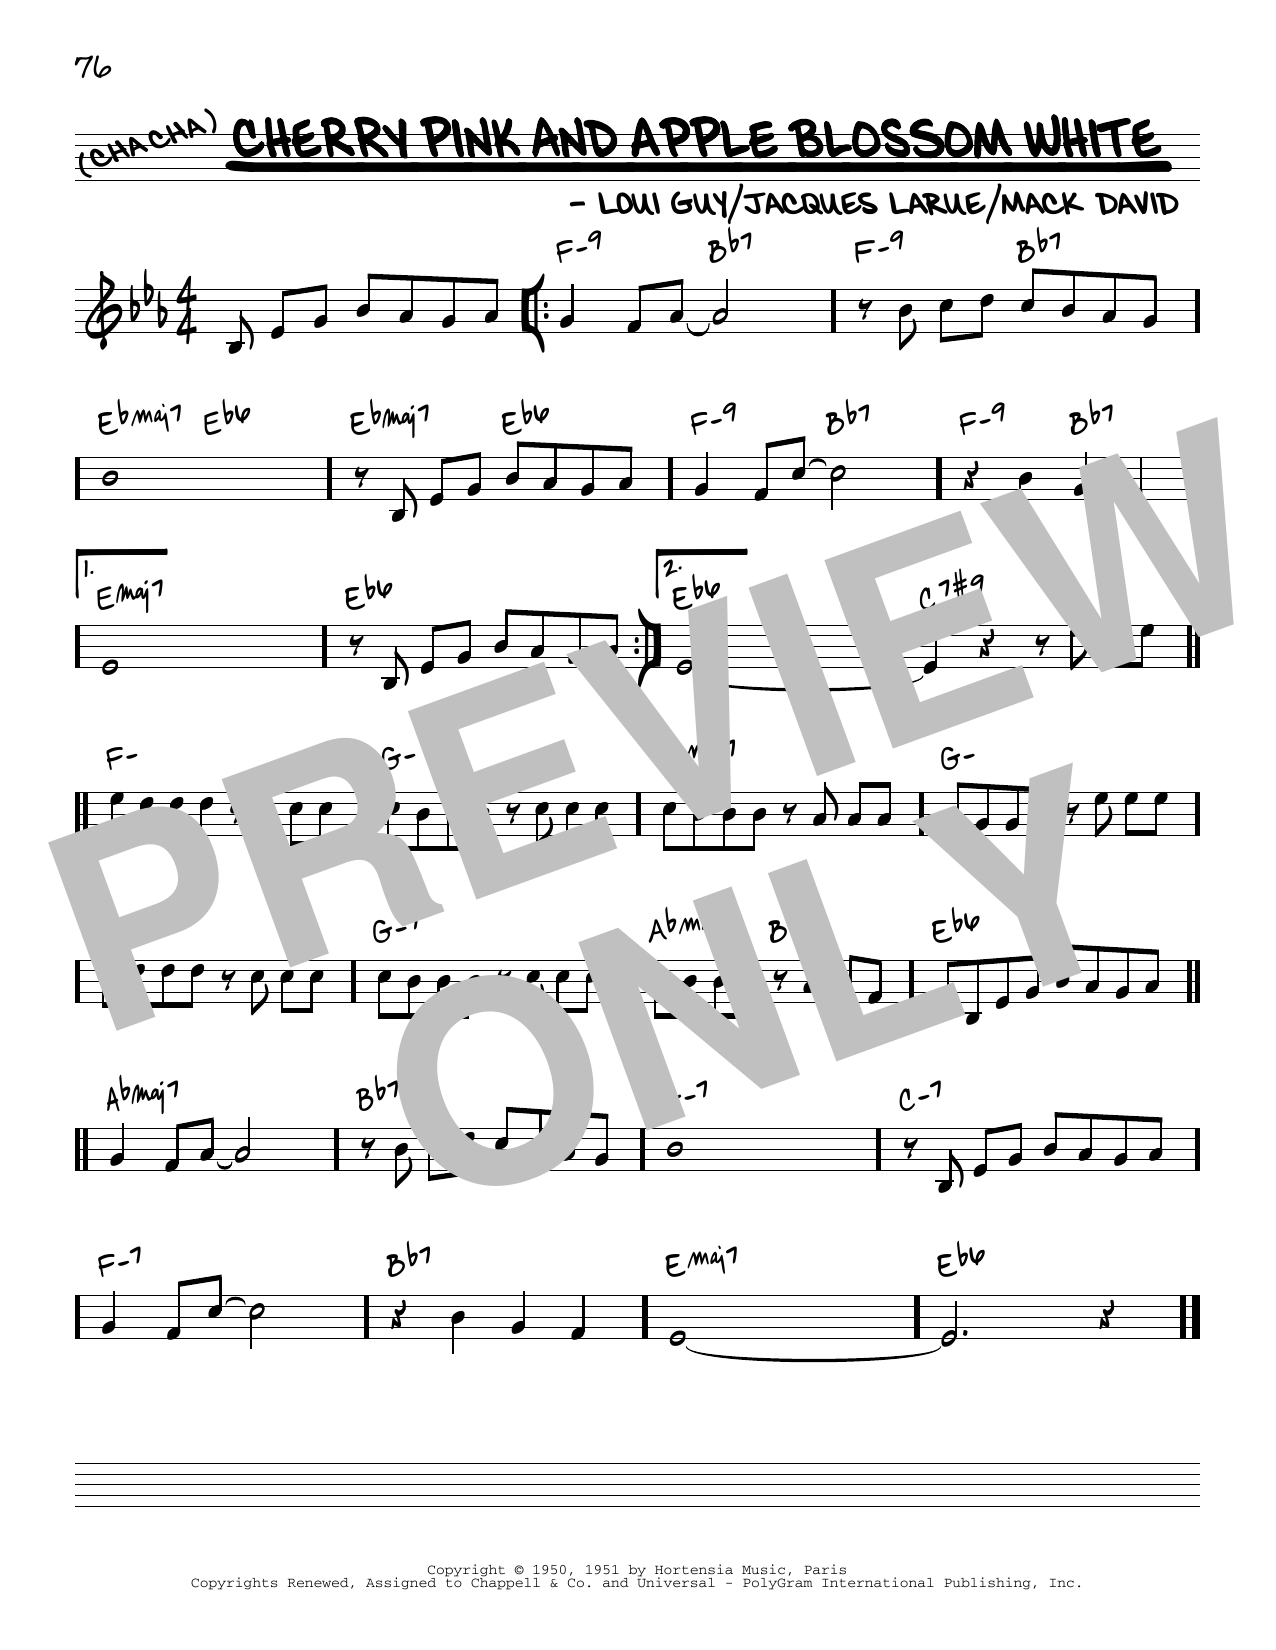 Download Mack David Cherry Pink And Apple Blossom White [Re Sheet Music